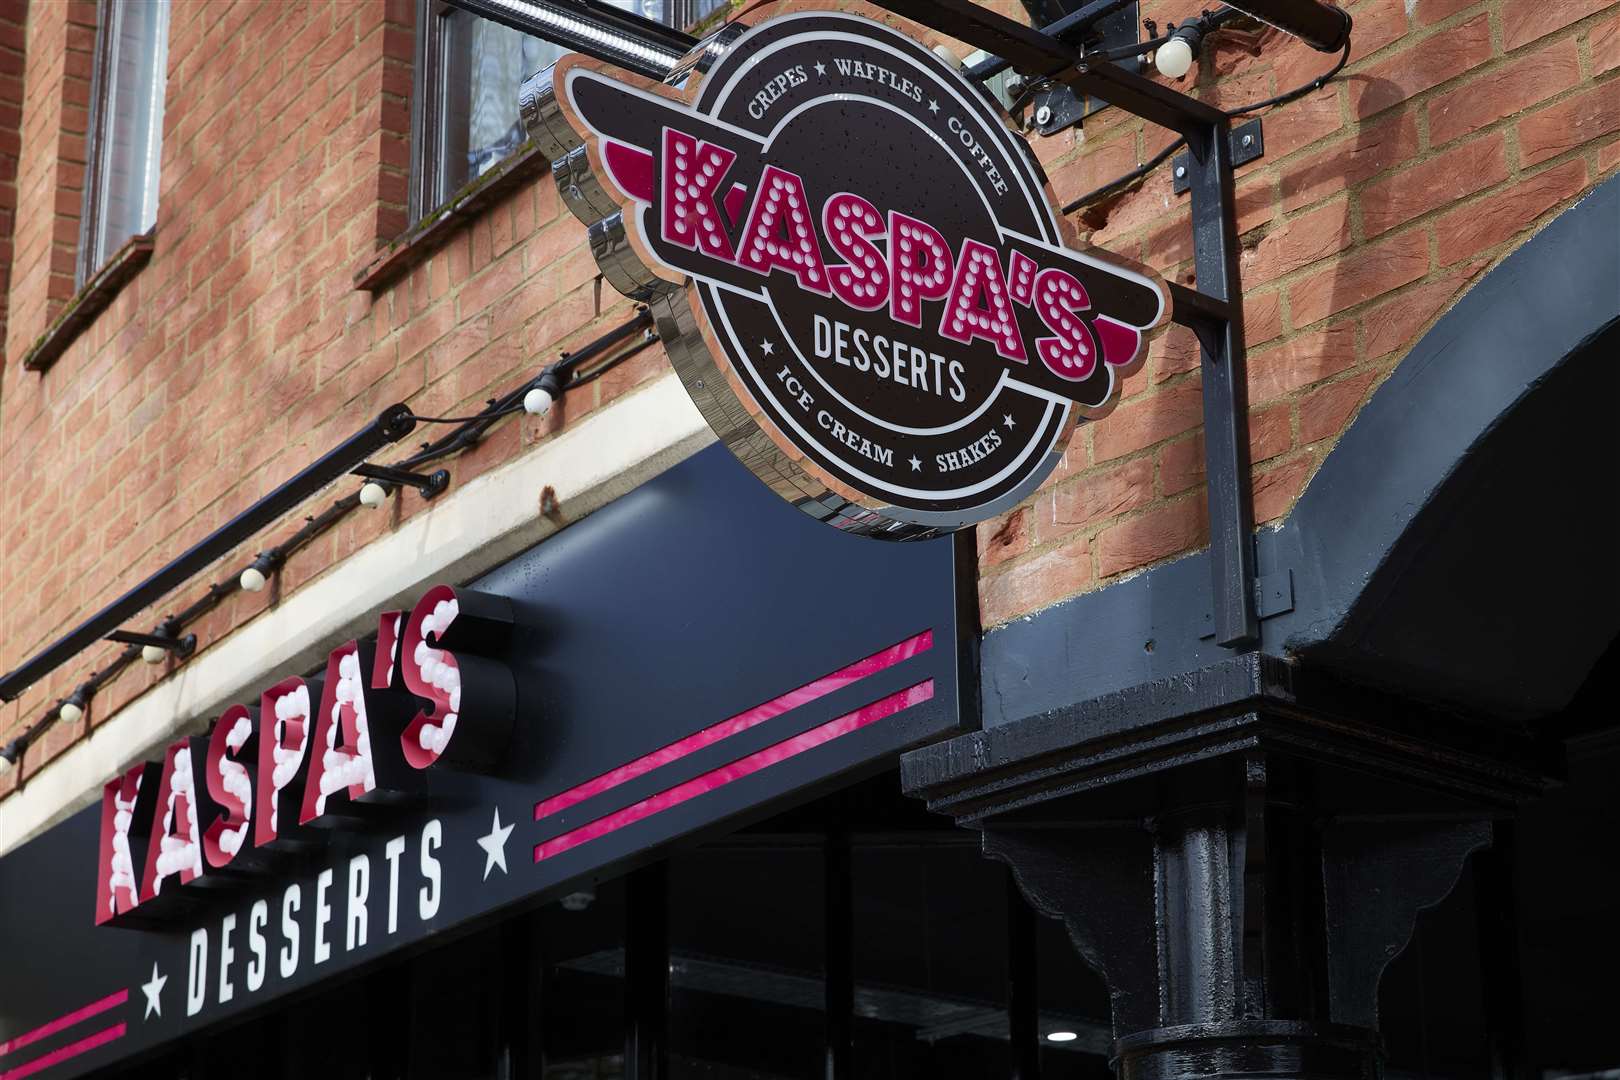 Kaspa's Desserts will be opening at Chatham Dockside